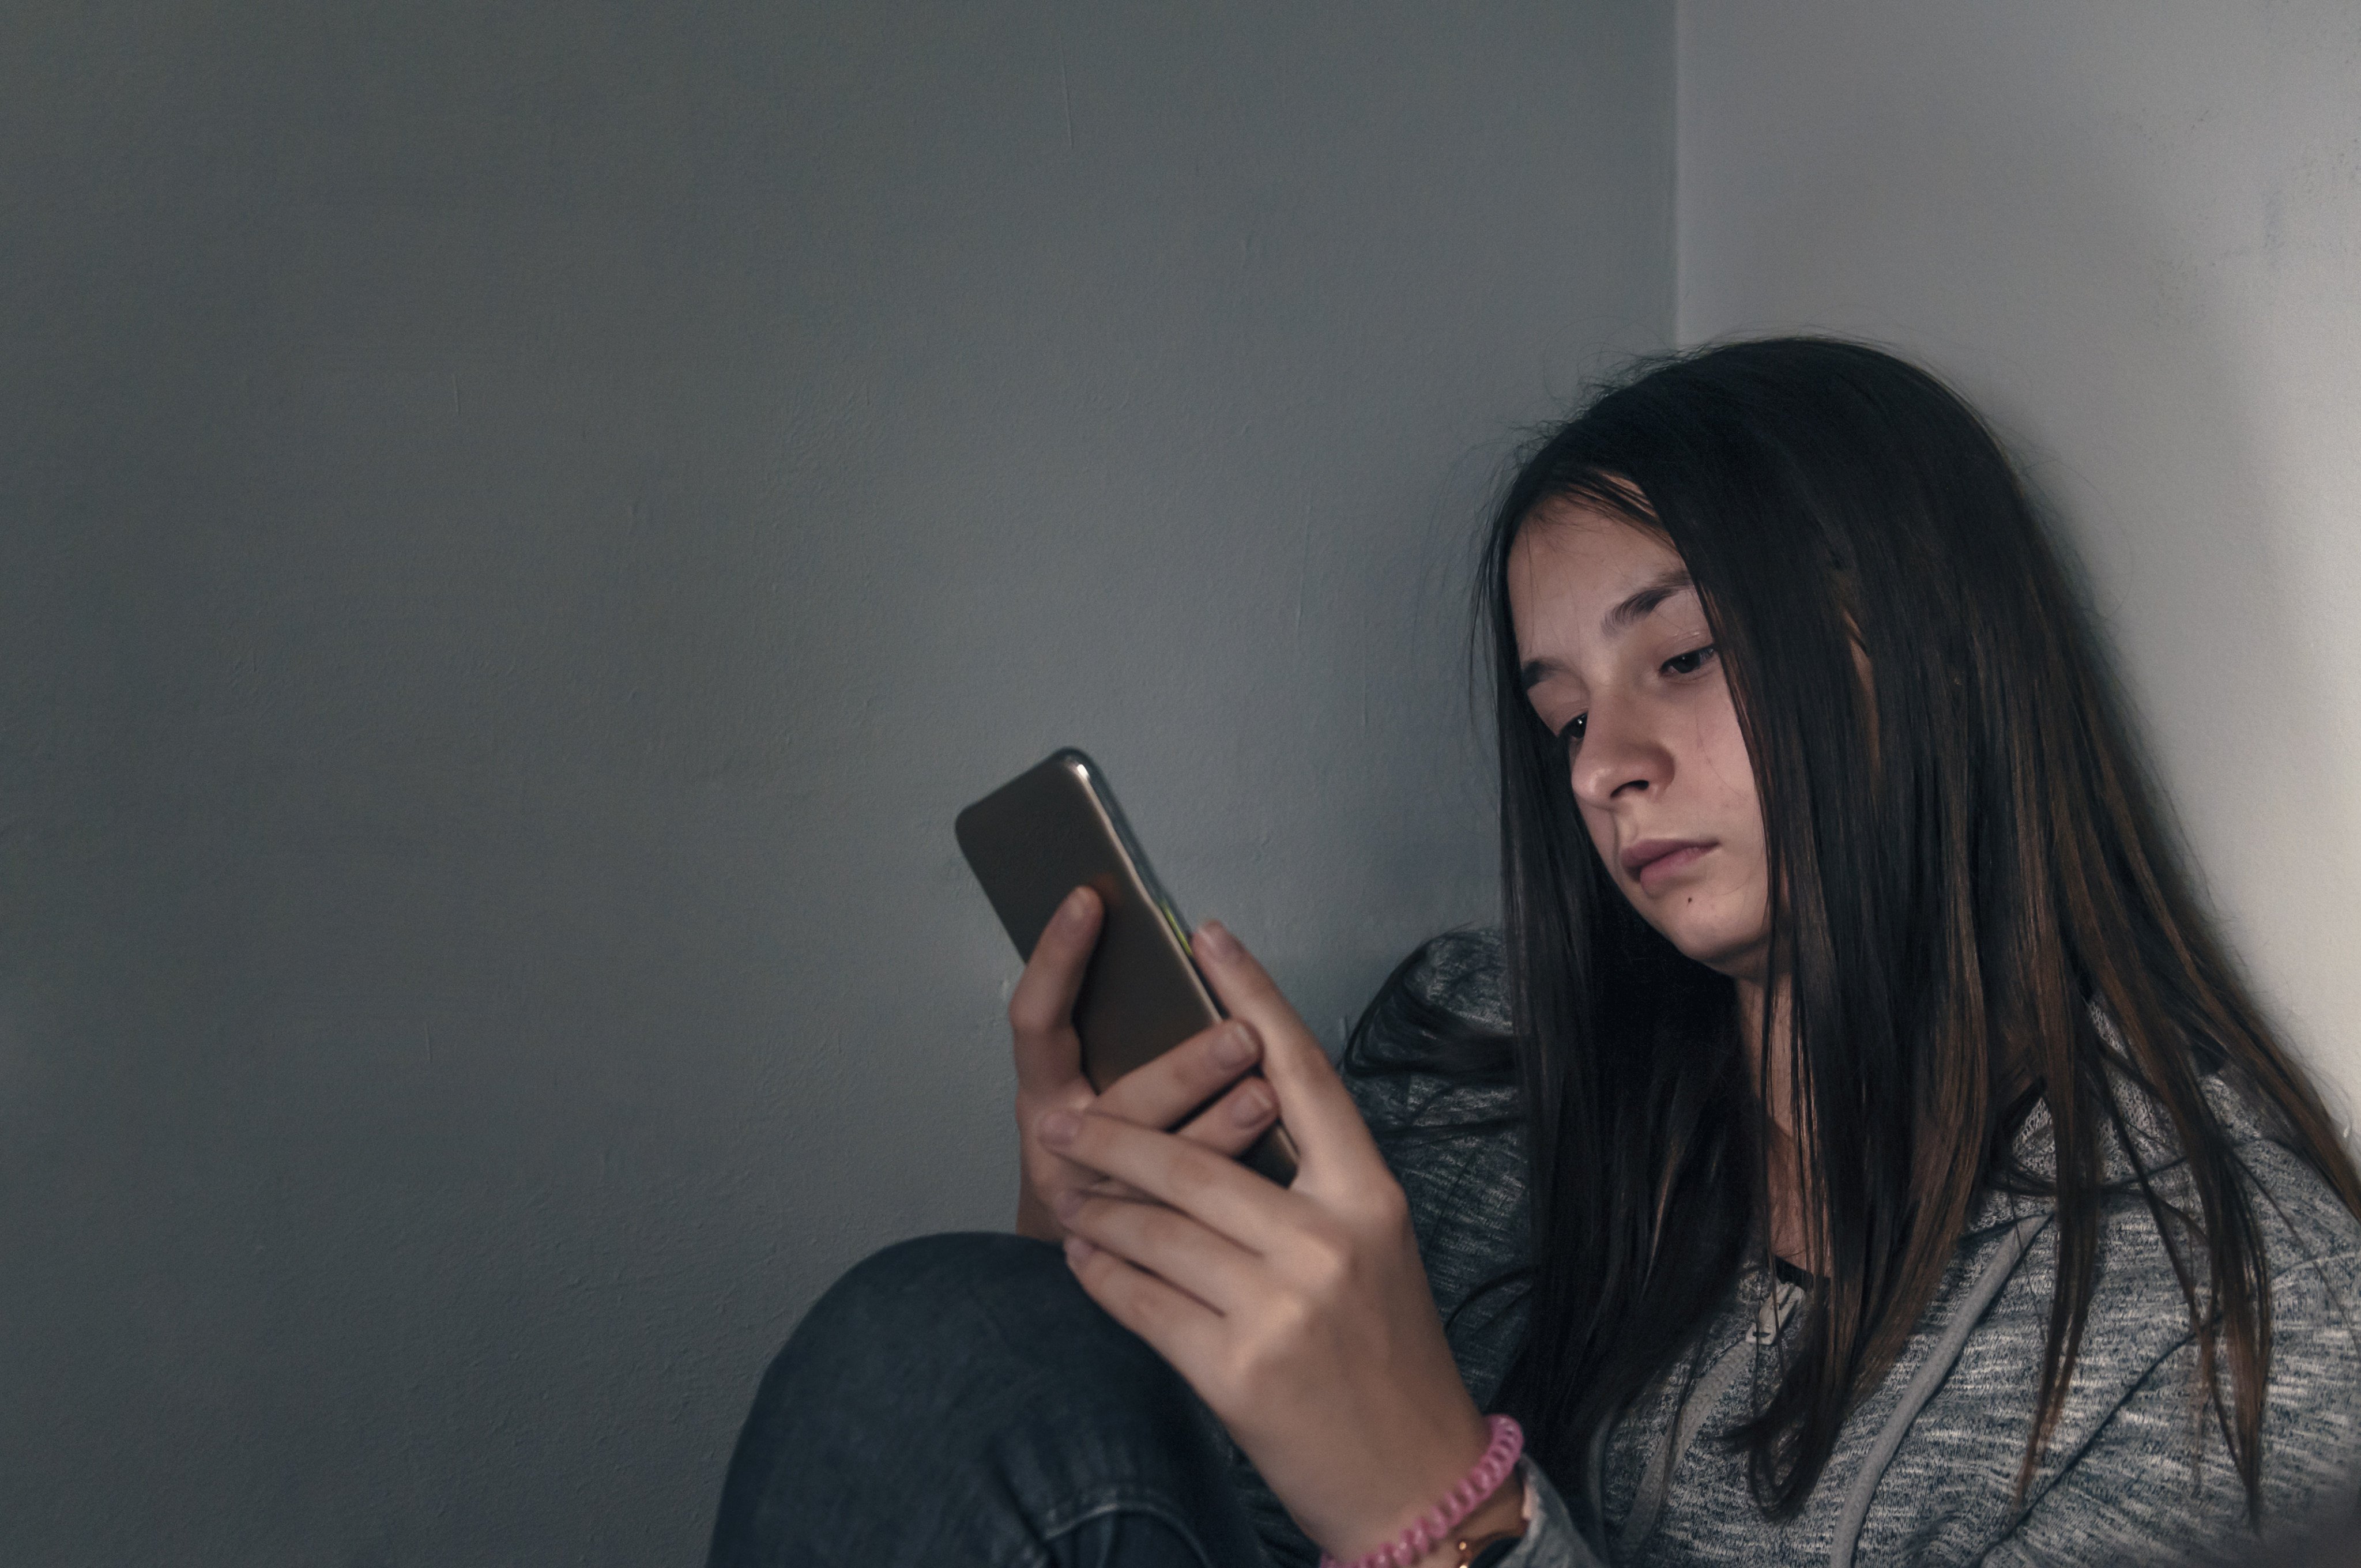 As smartphones and social media have become more ubiquitous, so too have opportunities for cyberbullying. Photo: Shutterstock